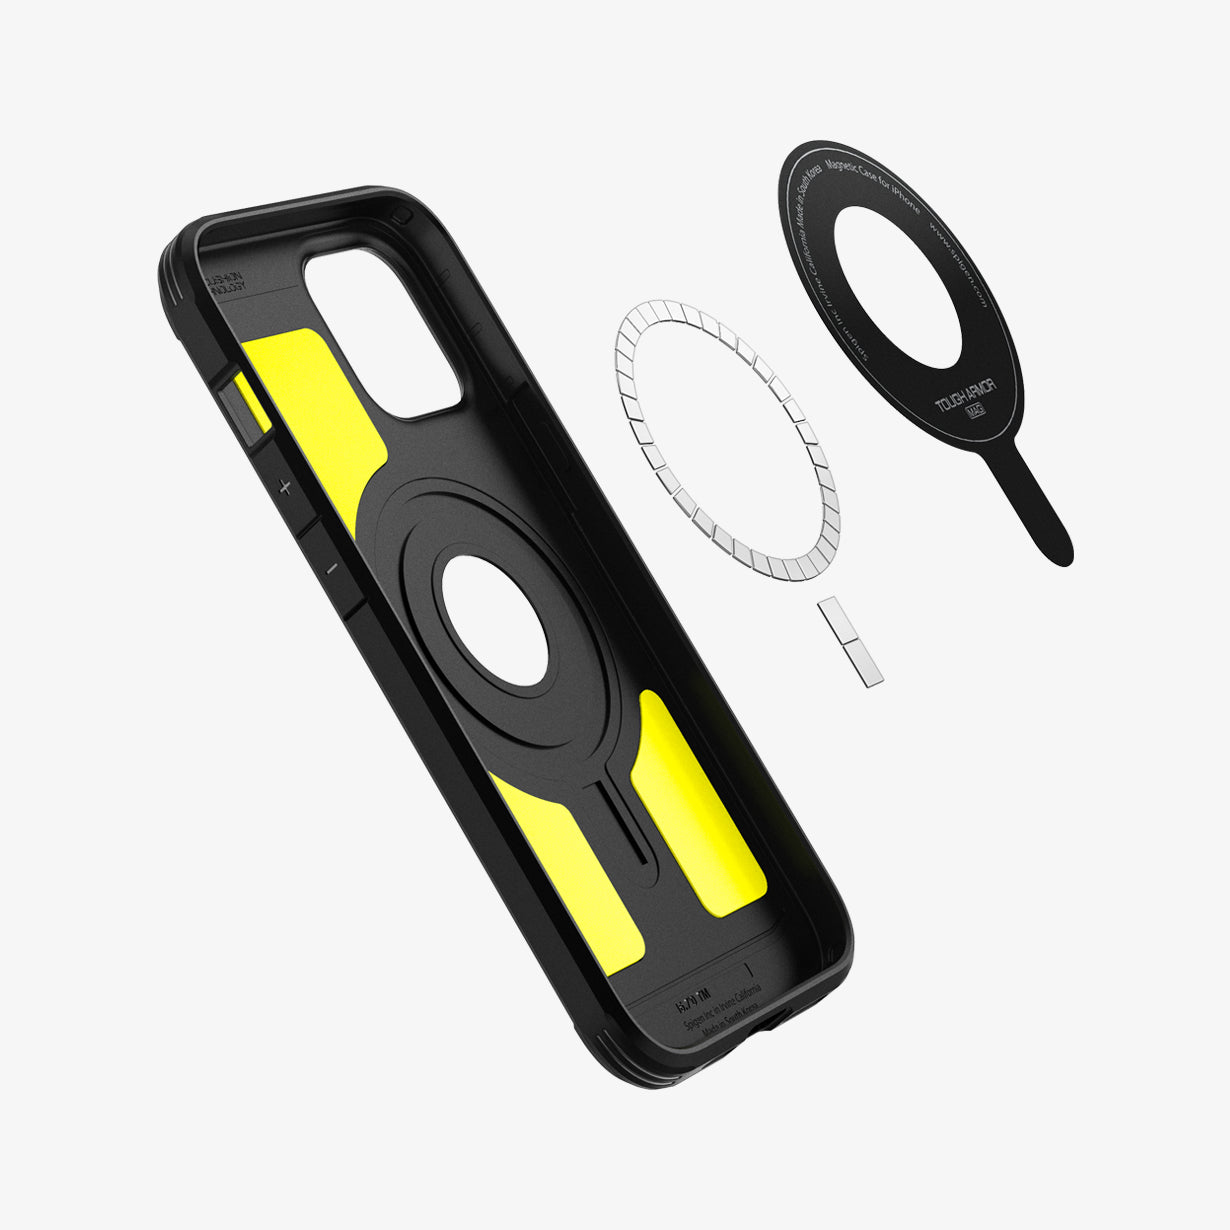 ACS02619 - iPhone 12 Pro Max Case Tough Armor Mag Safe Compatible in black showing the inside magnetic ring layers